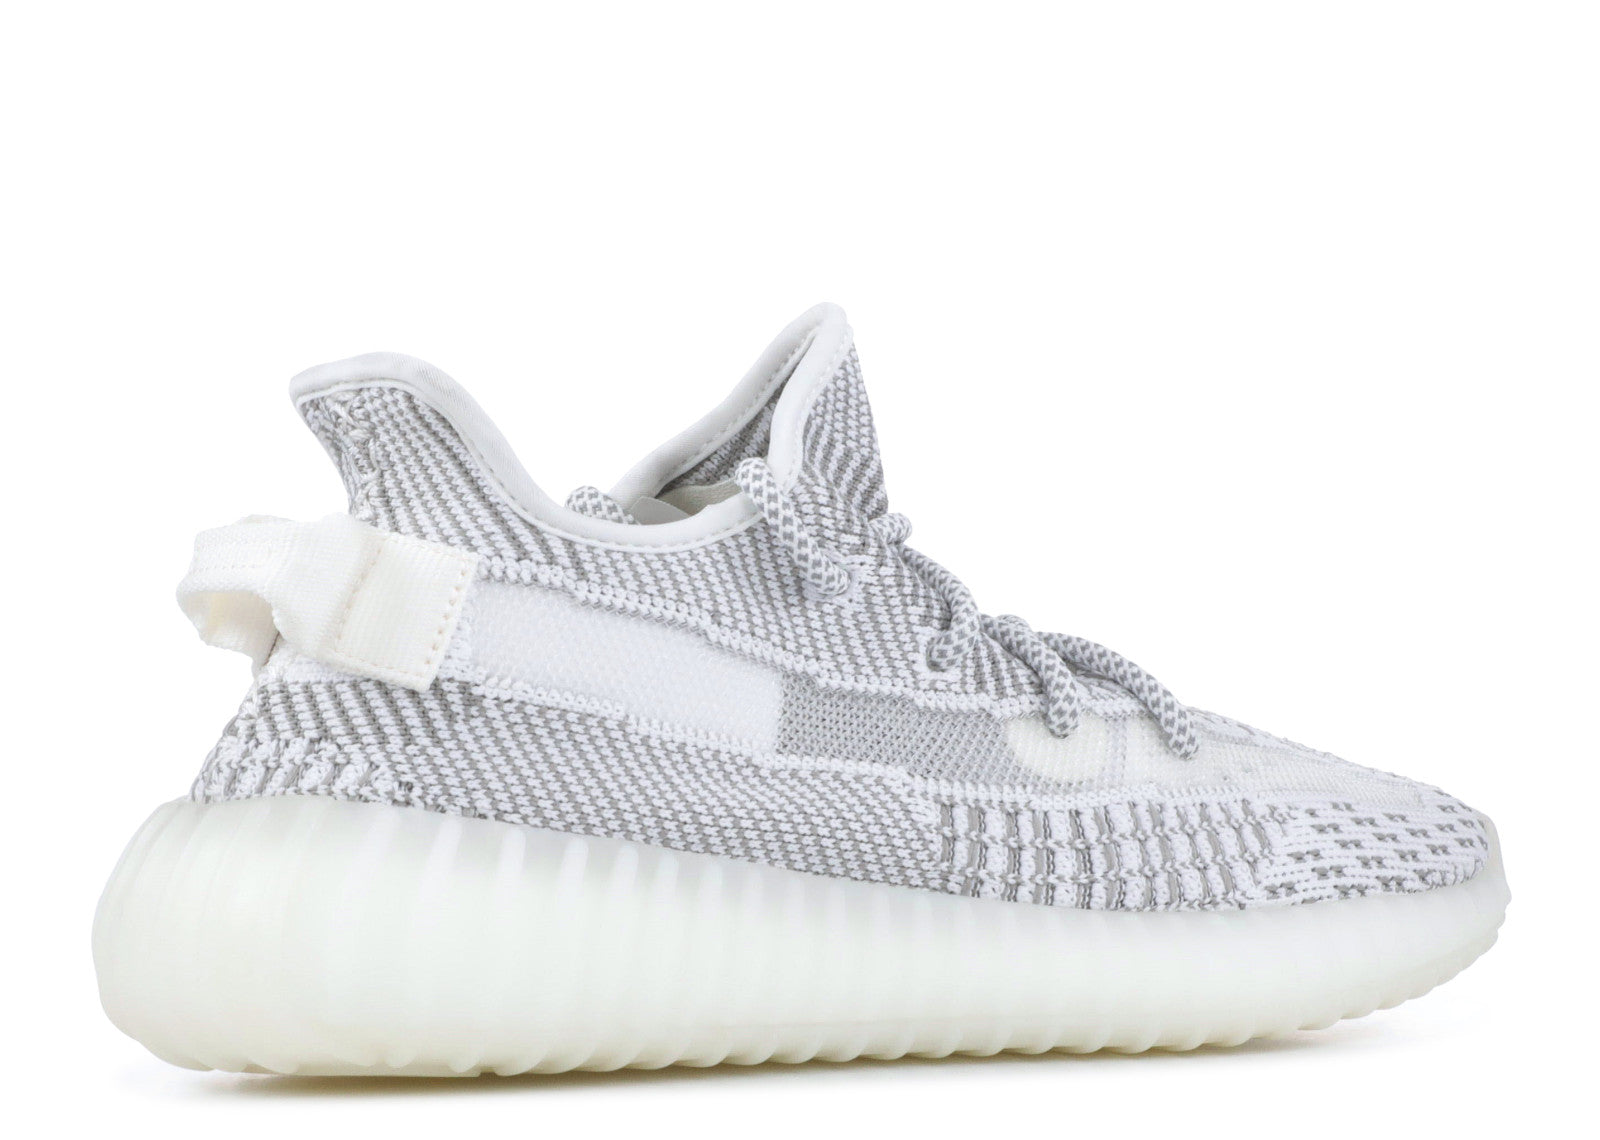 Adidas Yeezy Boost 350 V2 'Static Non-Reflective’